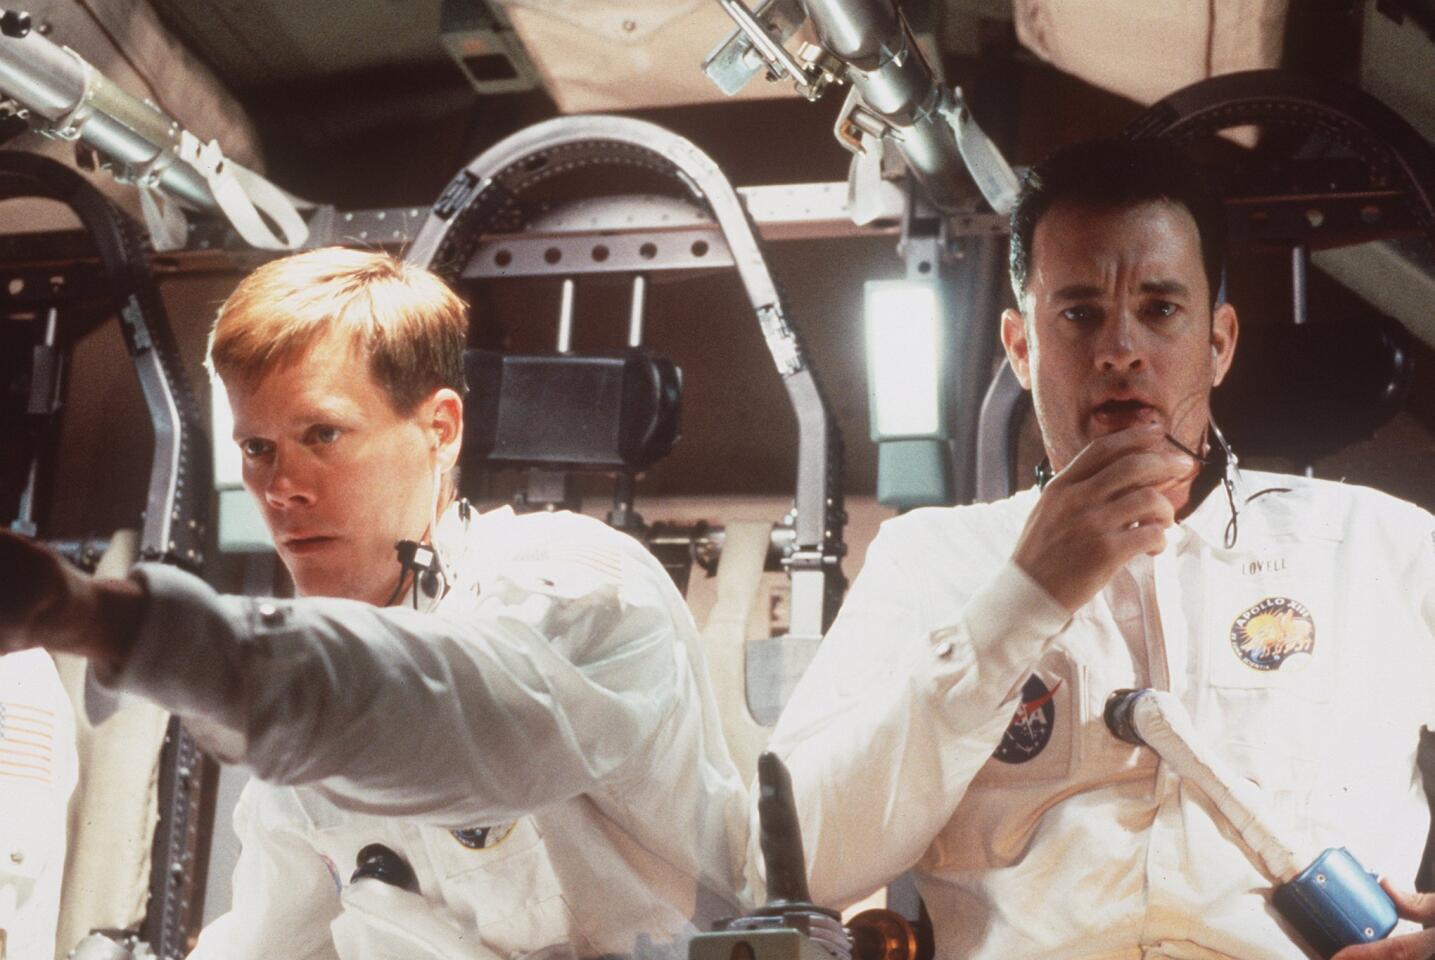 Fresh off his success in "The River Wild," Bacon played Jack Swigert in "Apollo 13," joining Tom Hanks and Bill Paxton aboard the ill-fated moon-bound mission. The movie was both a critical and box-office hit.